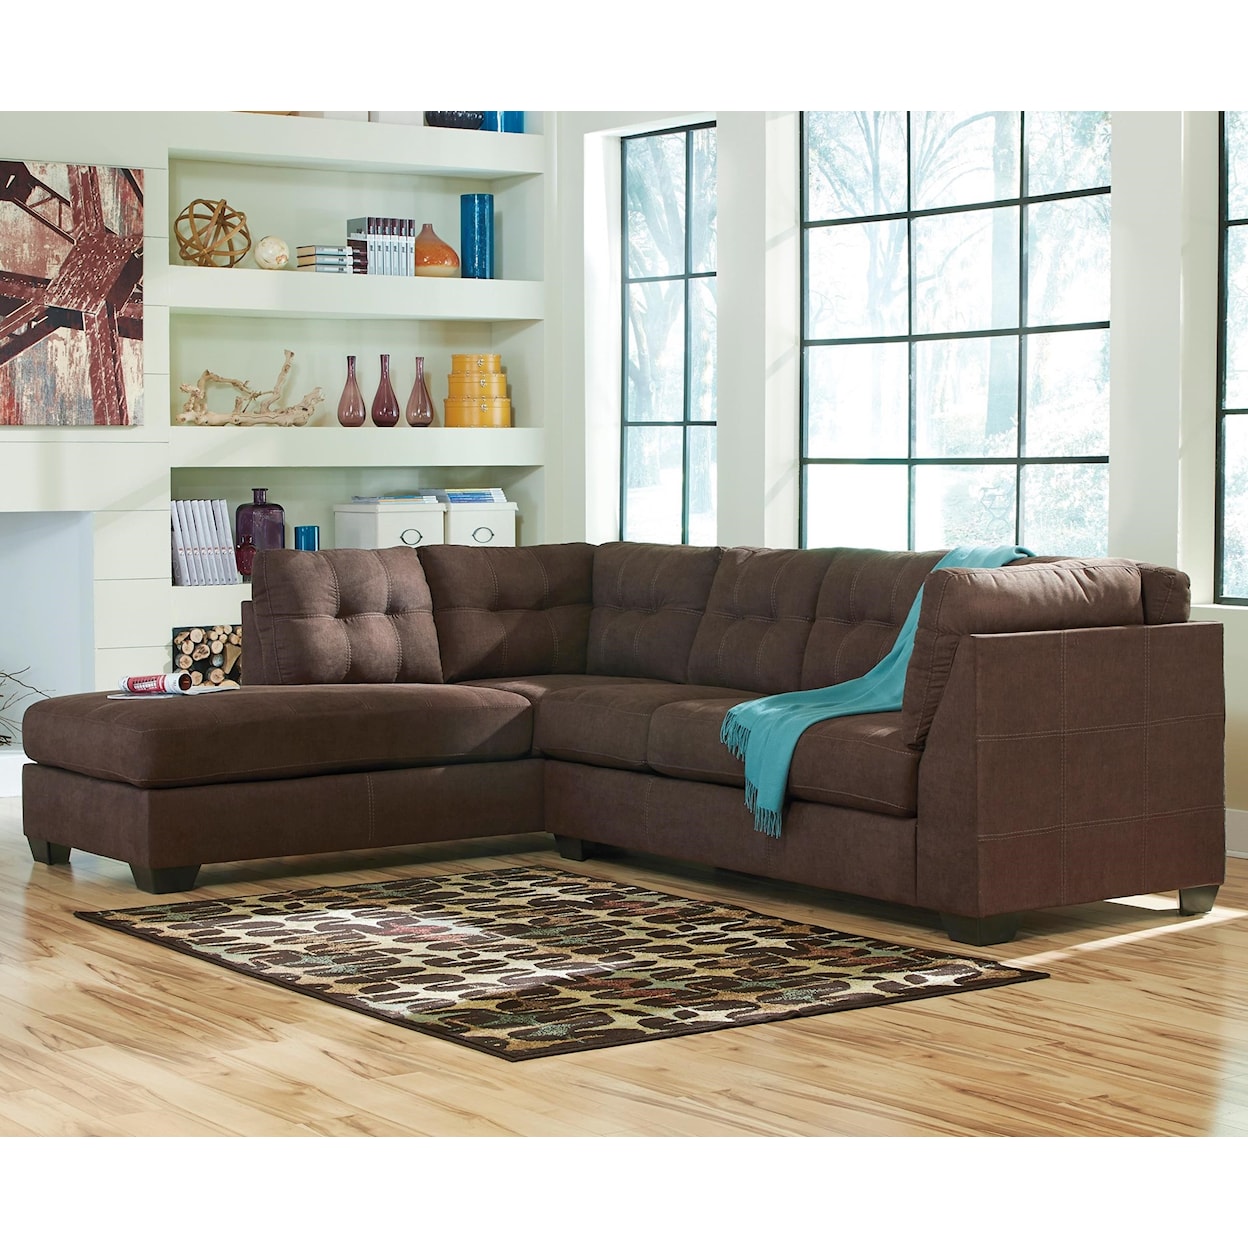 Ashley Furniture Benchcraft Maier 2-Piece Sectional with Chaise